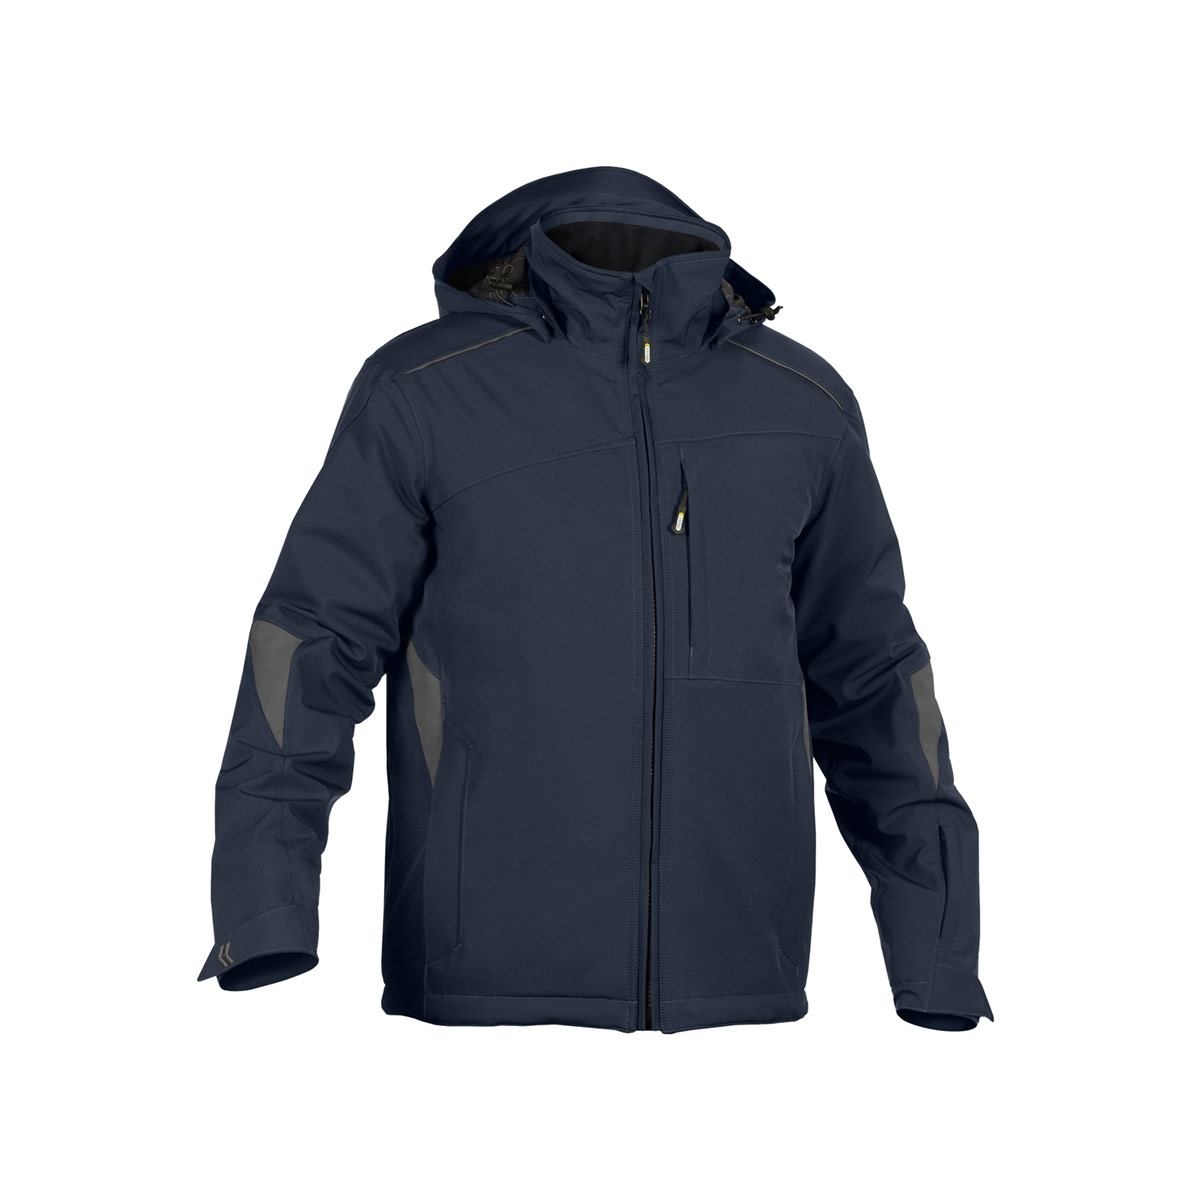 Dassy NORDIX stretch winter jacket waterproof and breathable NORDIX ...